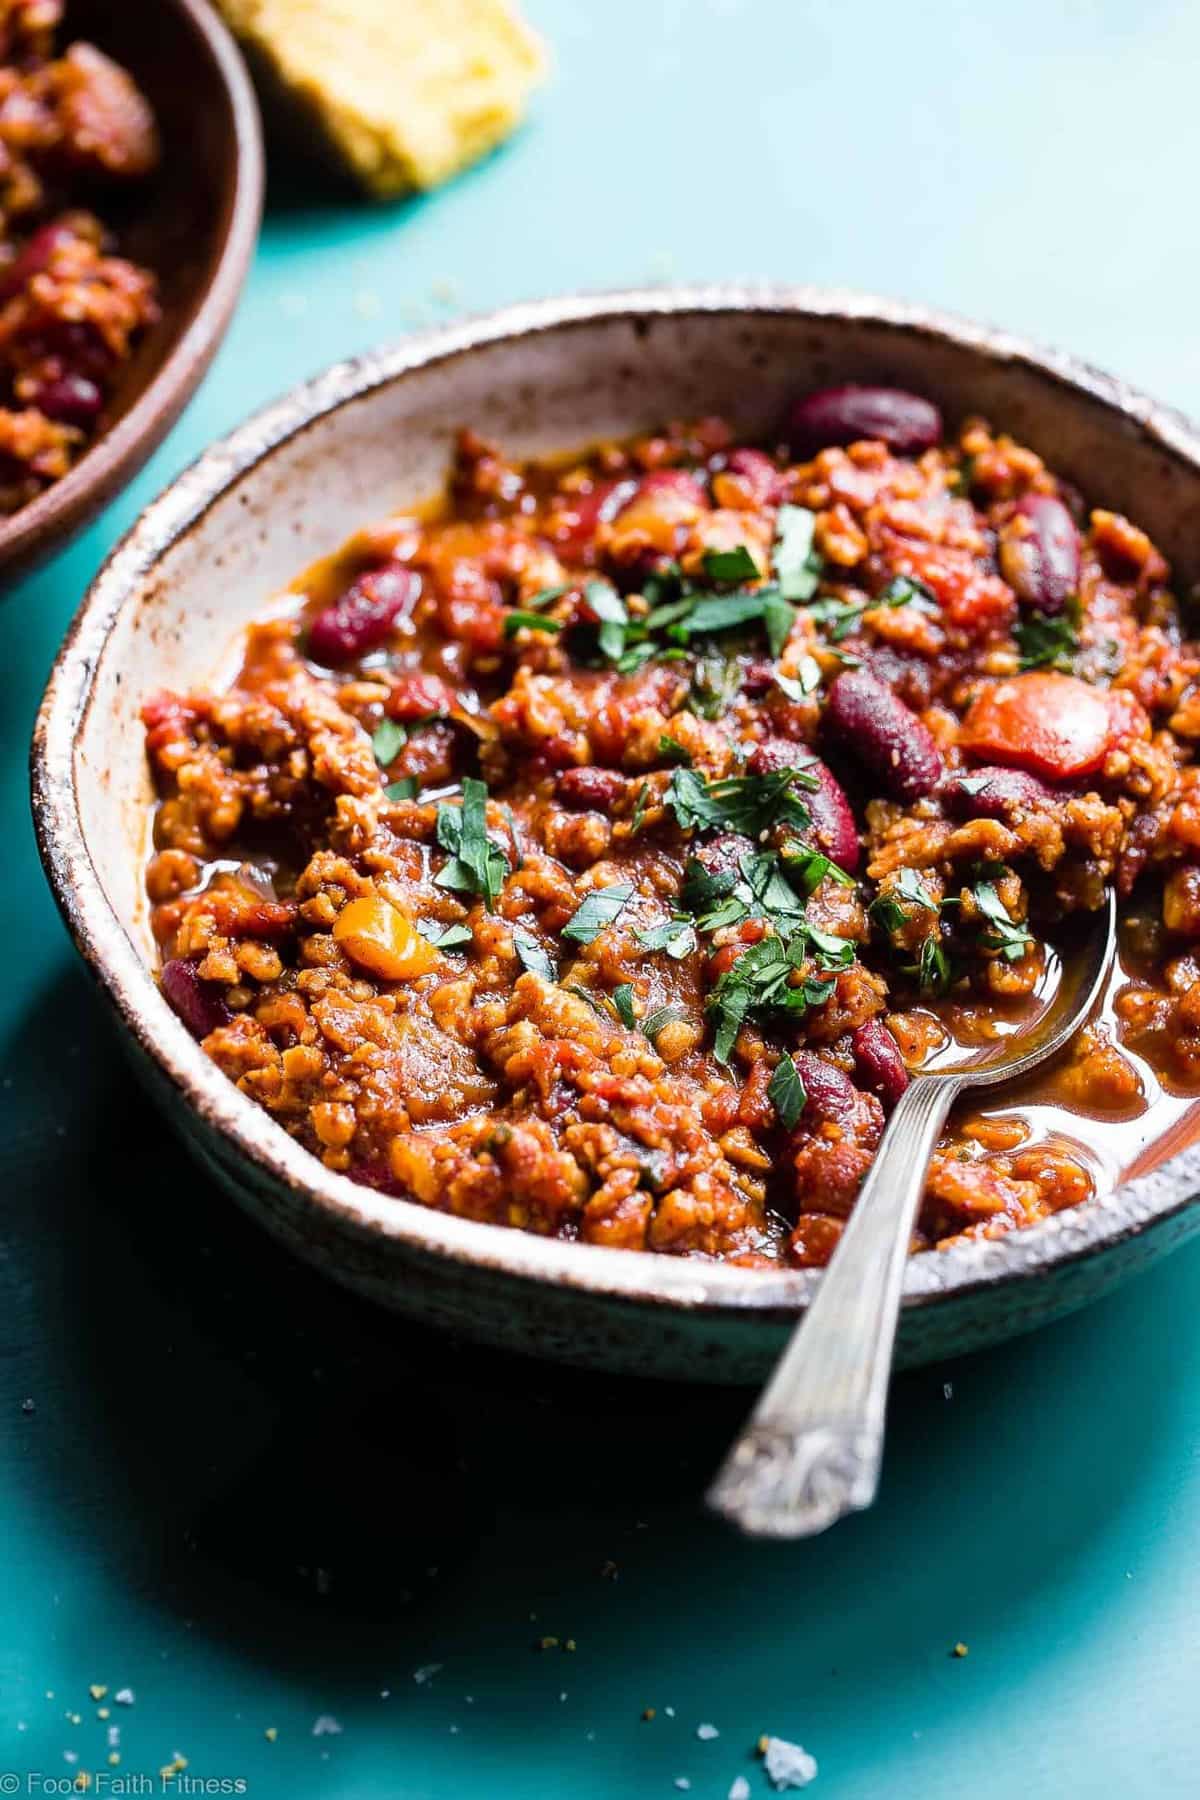 Instant Pot Meatless Easy Vegan Chili Recipe -  You will NEVER believe that this is a vegetarian chili recipe! It's a healthy, gluten free weeknight meal that is ready in only 30 minutes! Even meat-eaters are going to LOVE this recipe! | #Foodfaithfitness | #Vegan #Vegetarian #Chili #Instantpot #healthy